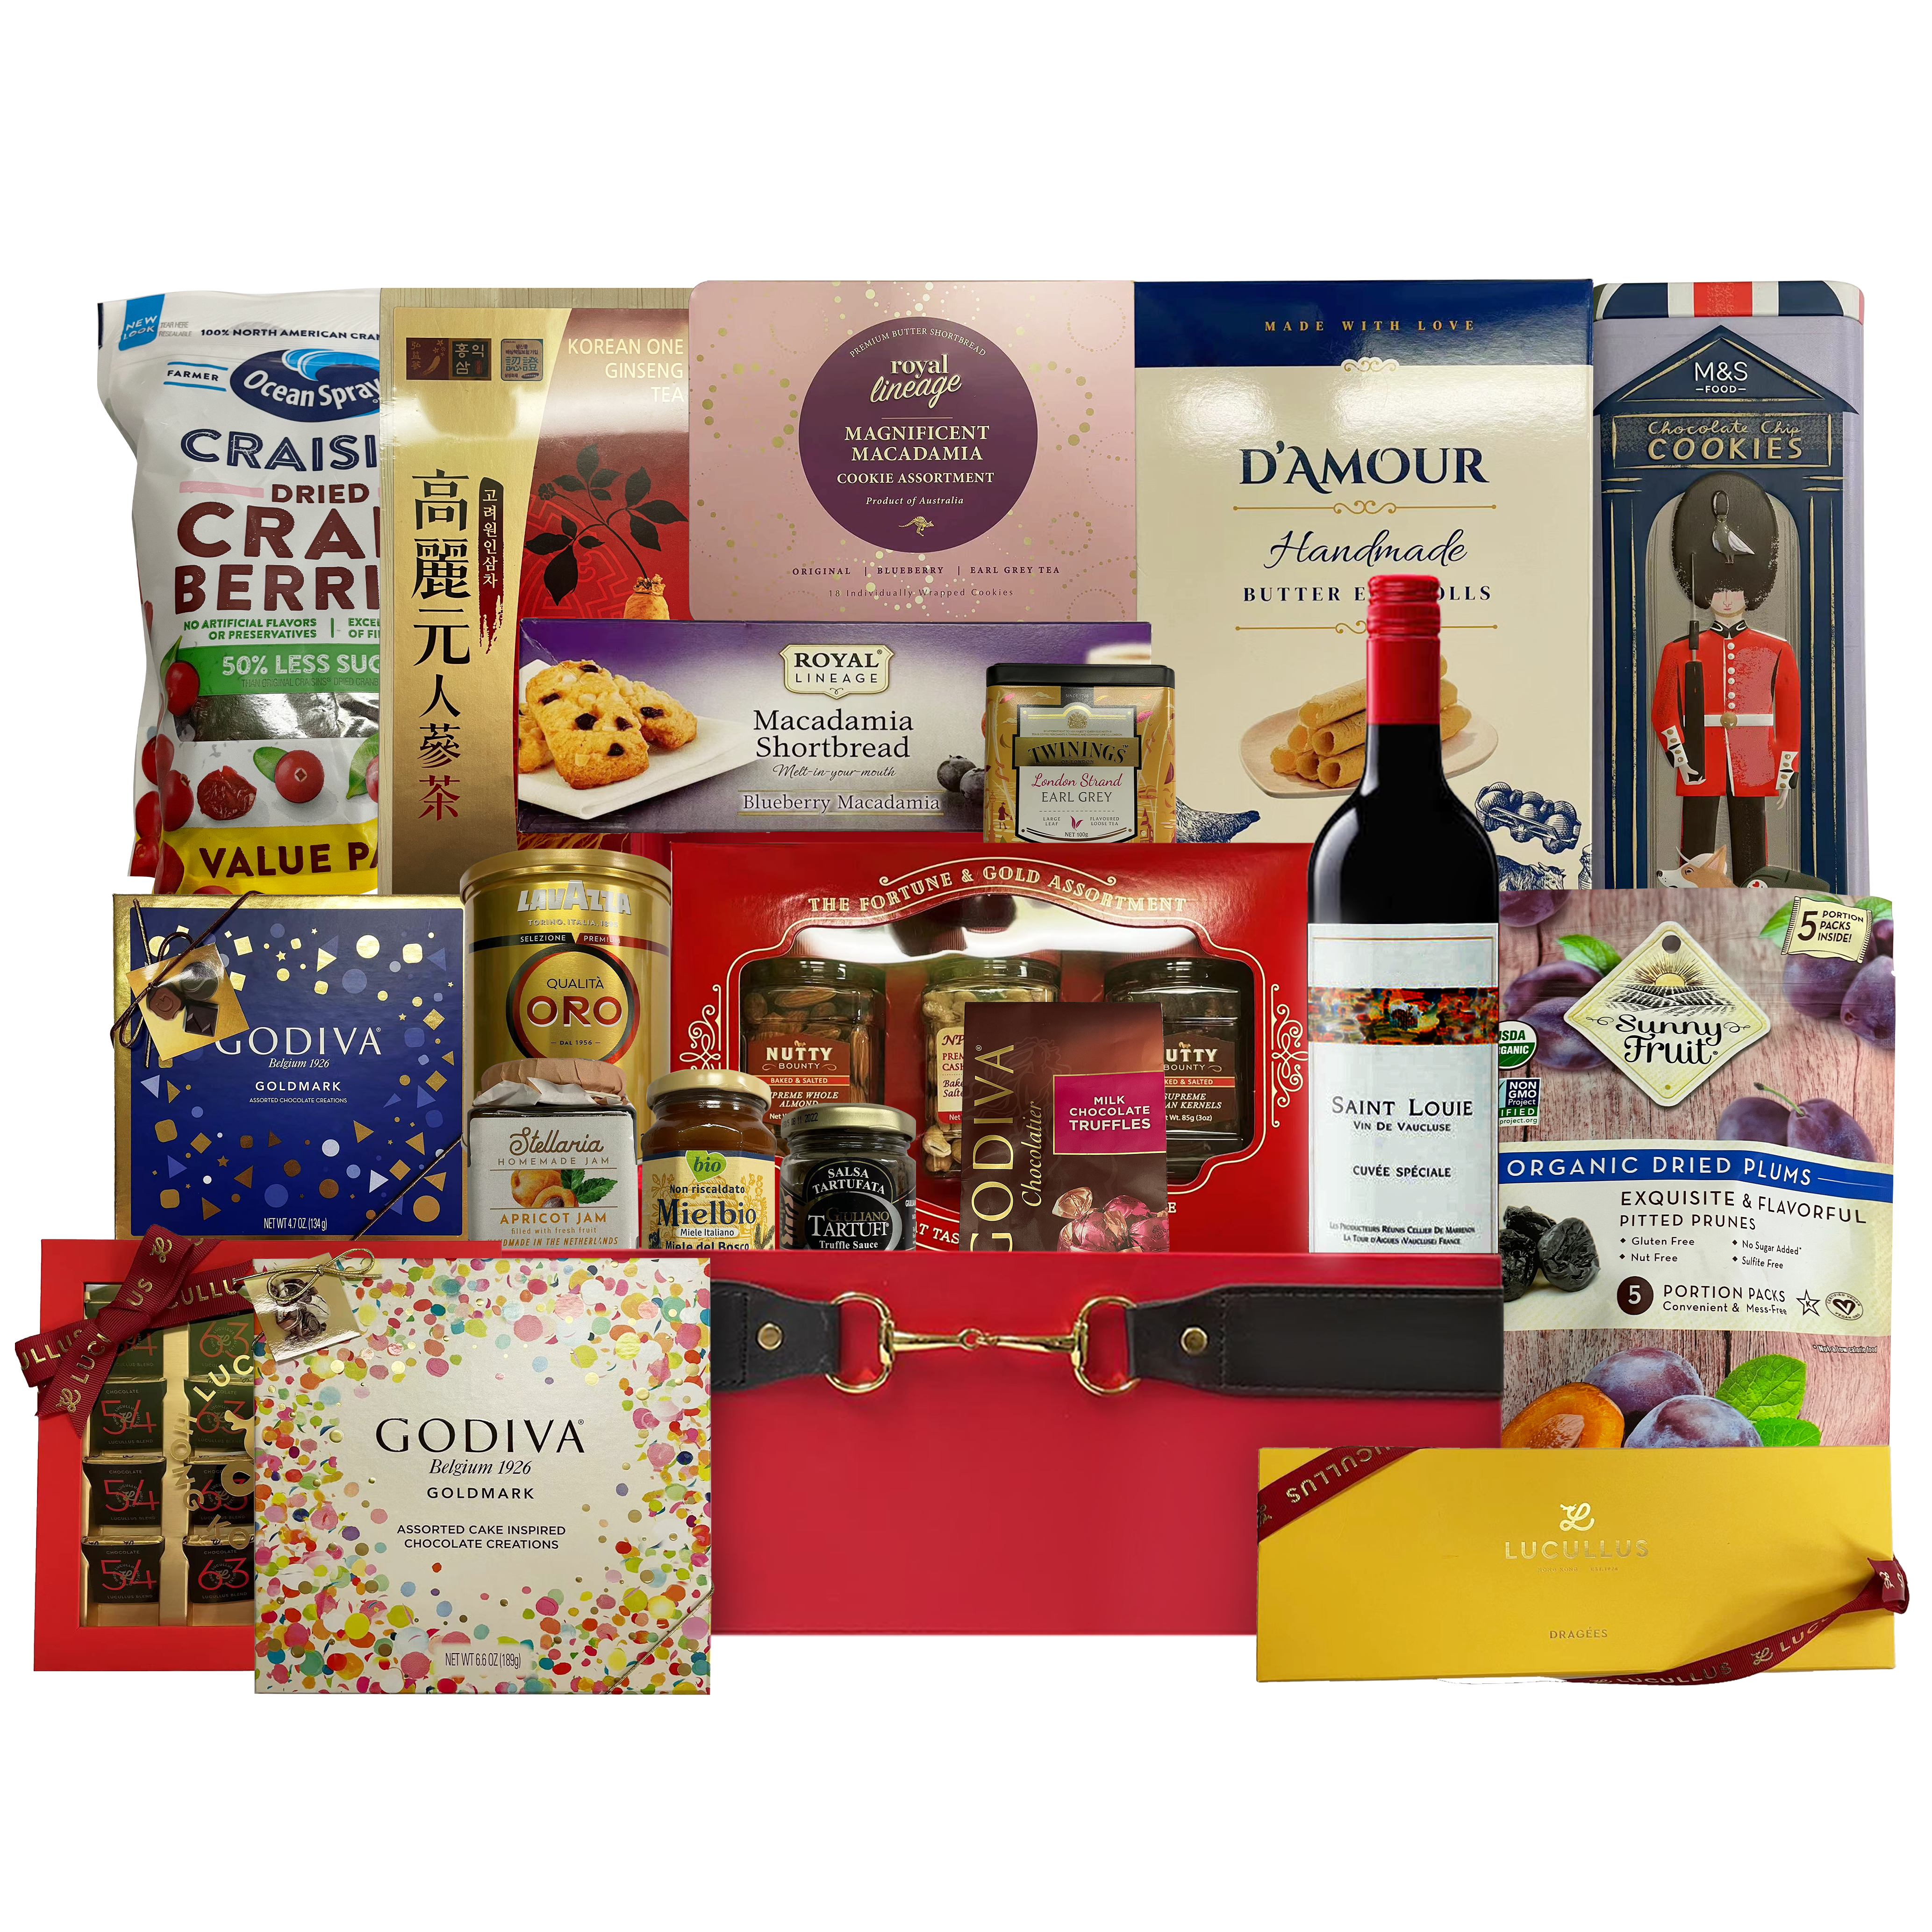 The Full House 2022 for Chinese New Year Hamper - Design Your Own Wine